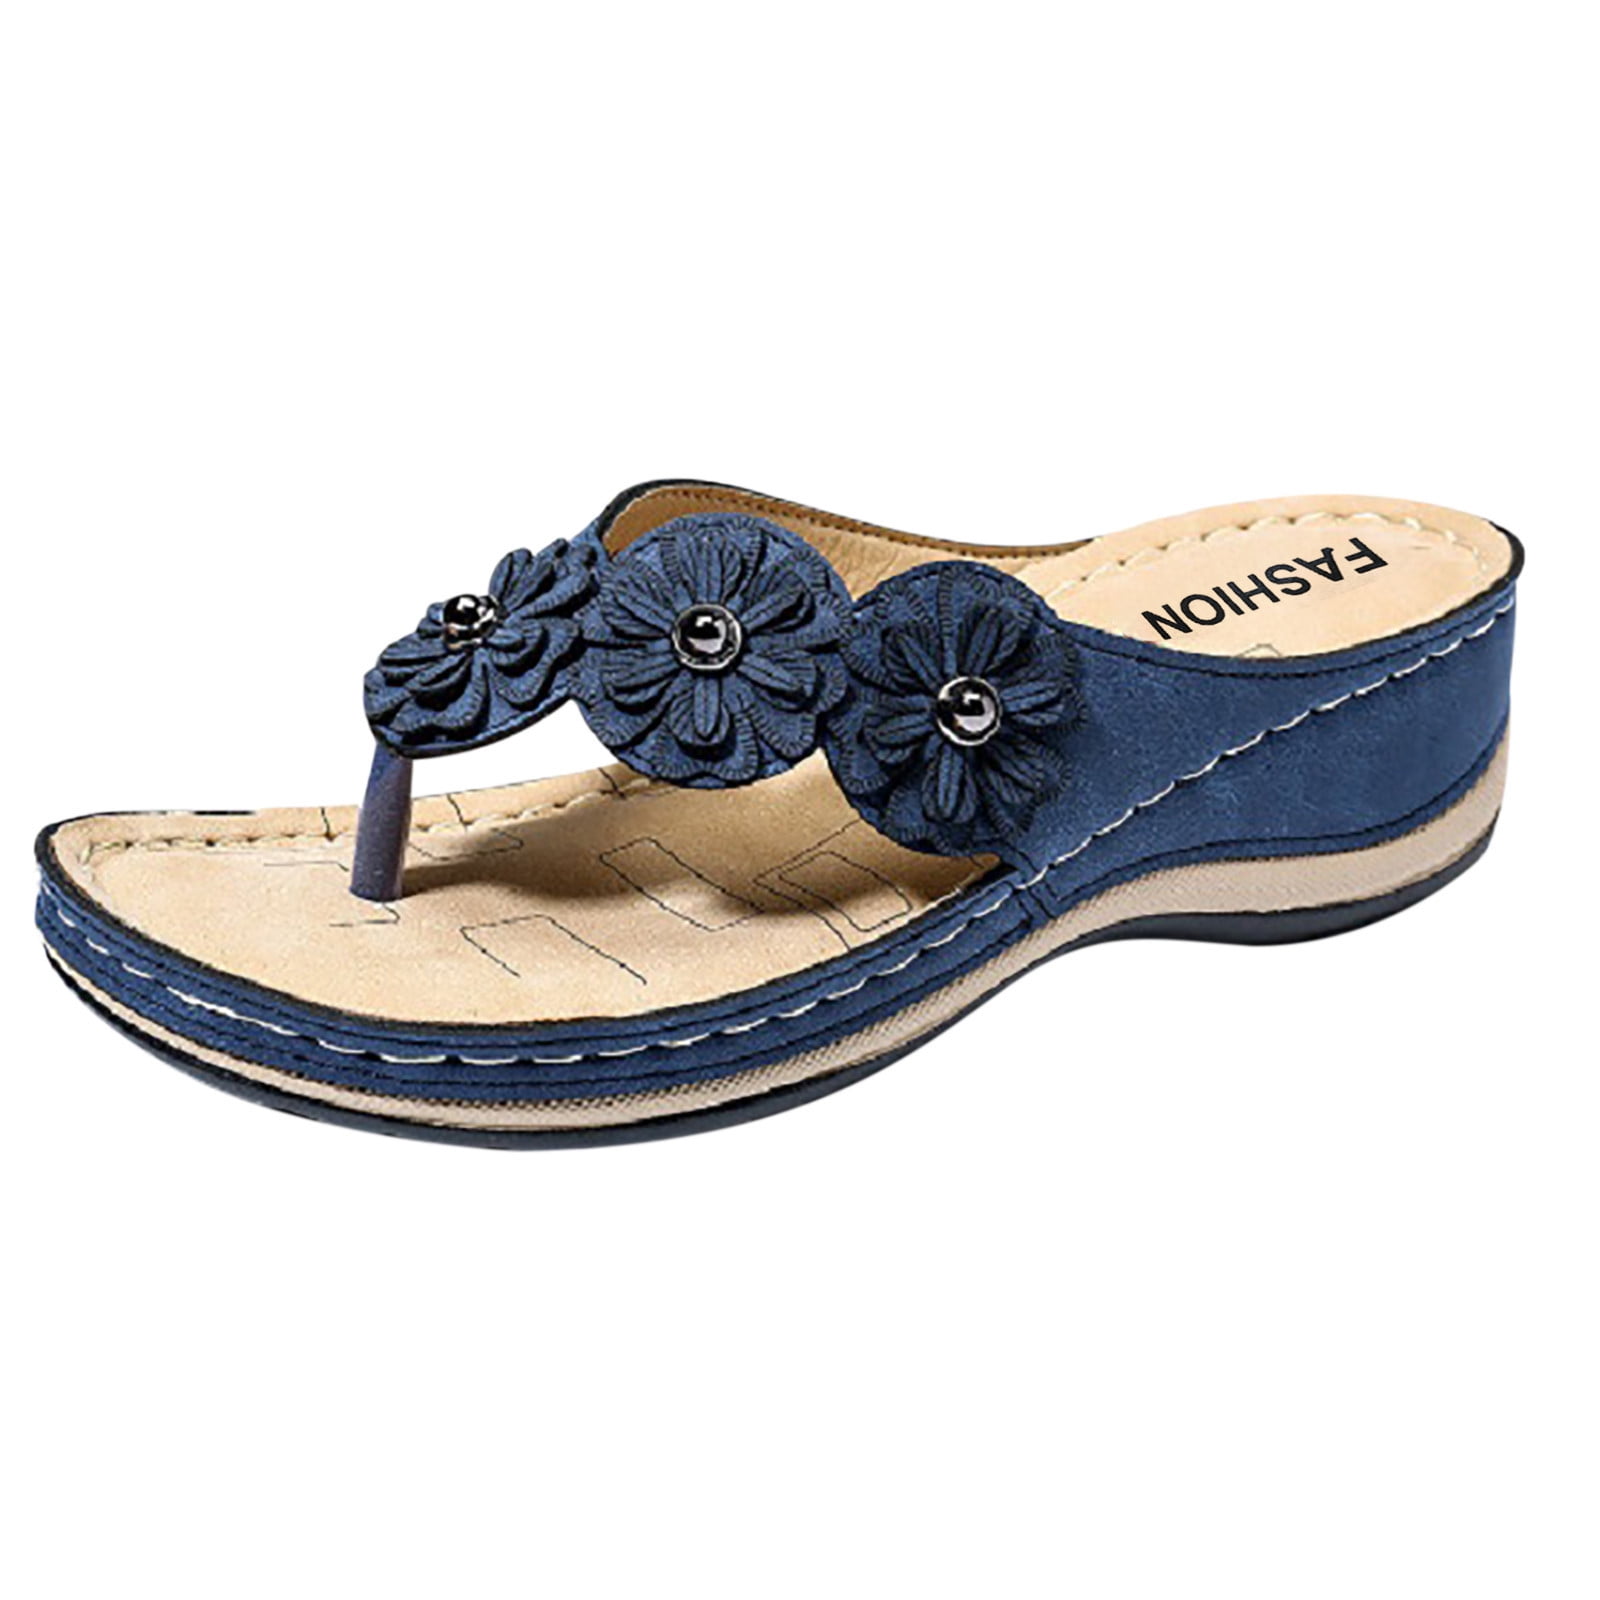 Zanvin Women's Sandals Shoes on Clearance, up to 30% off, Flip Flops ...